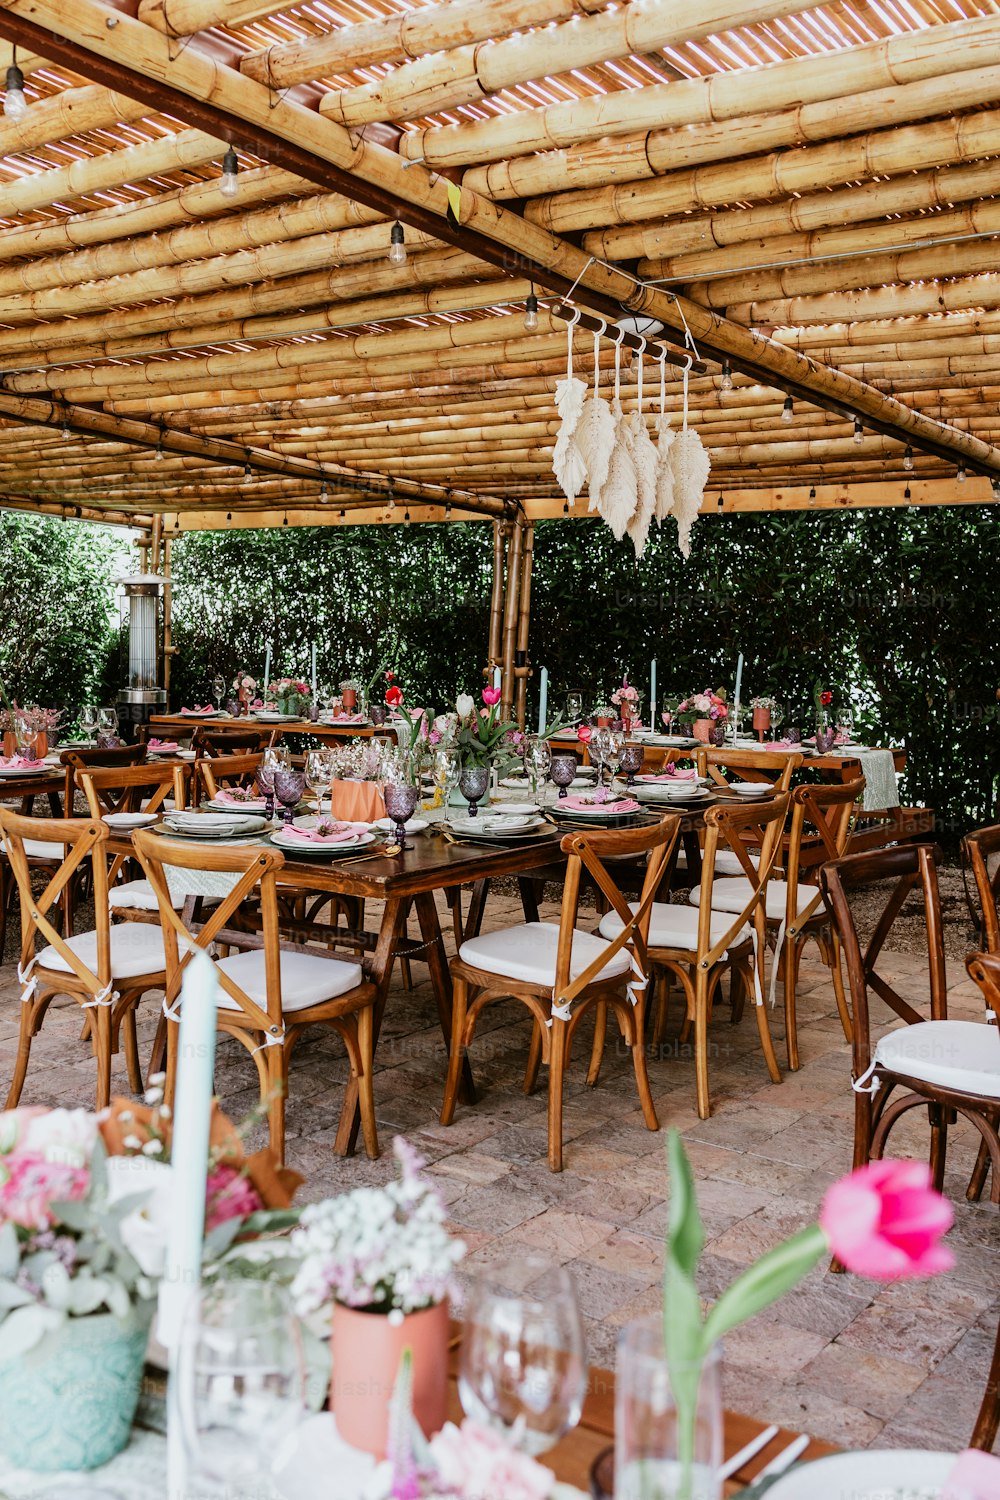 terrace with tables setup with flowers and plates on table decorated for Wedding Reception in Latin America